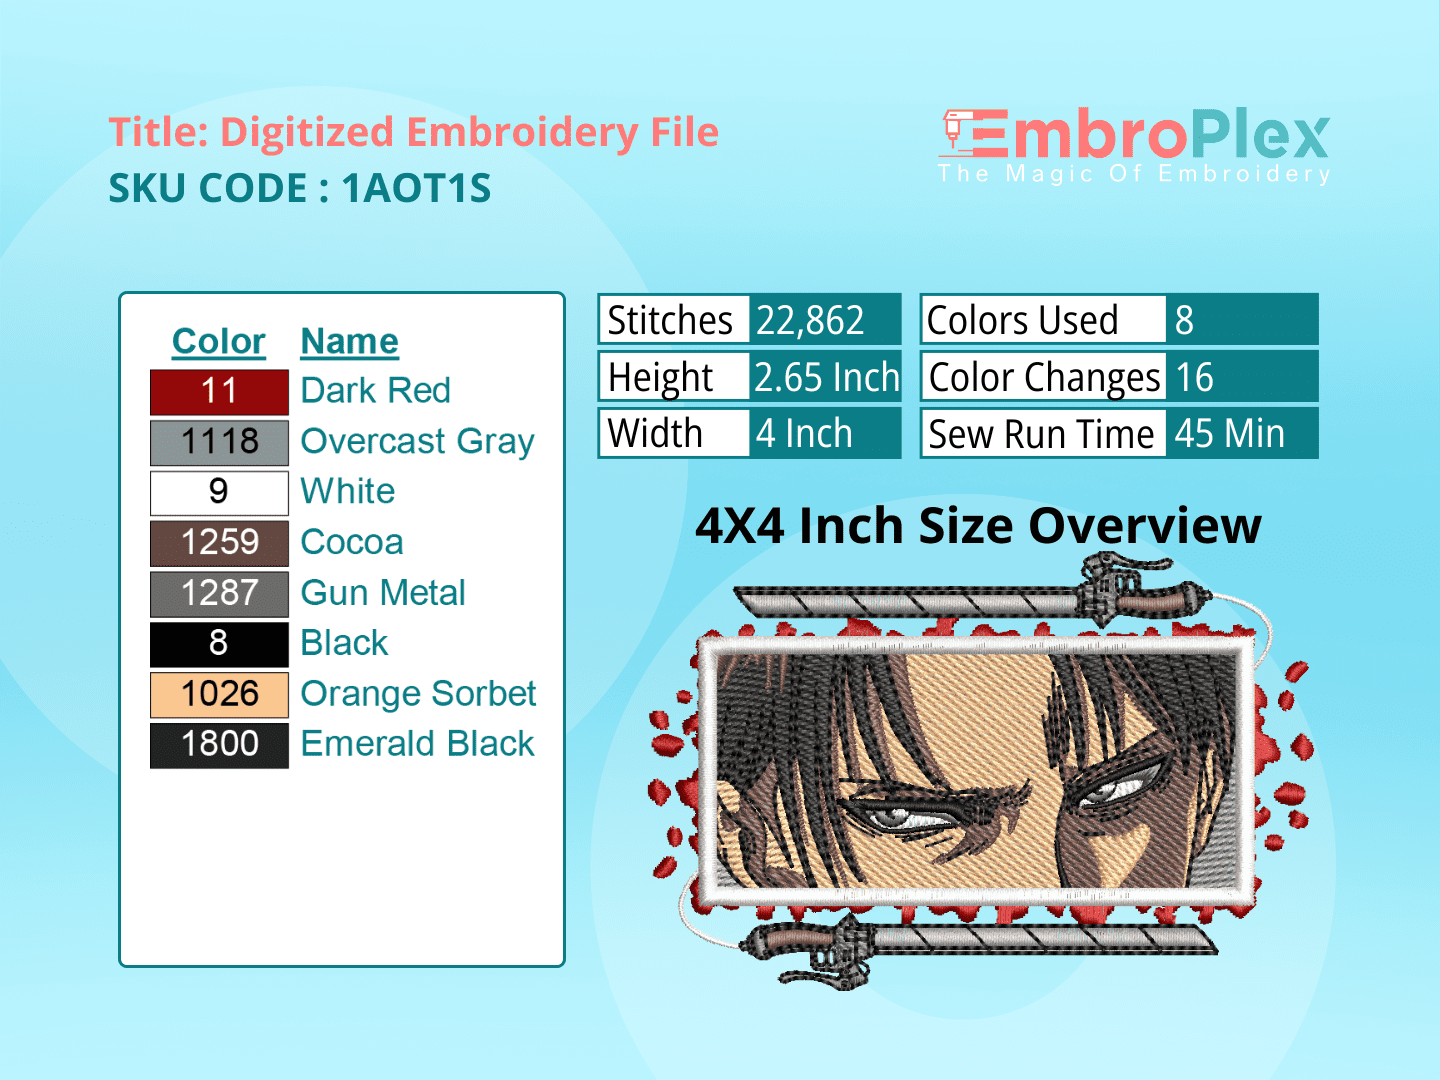 Anime-Inspired Eren Embroidery Design File - 4x4 Inch hoop Size Variation overview image